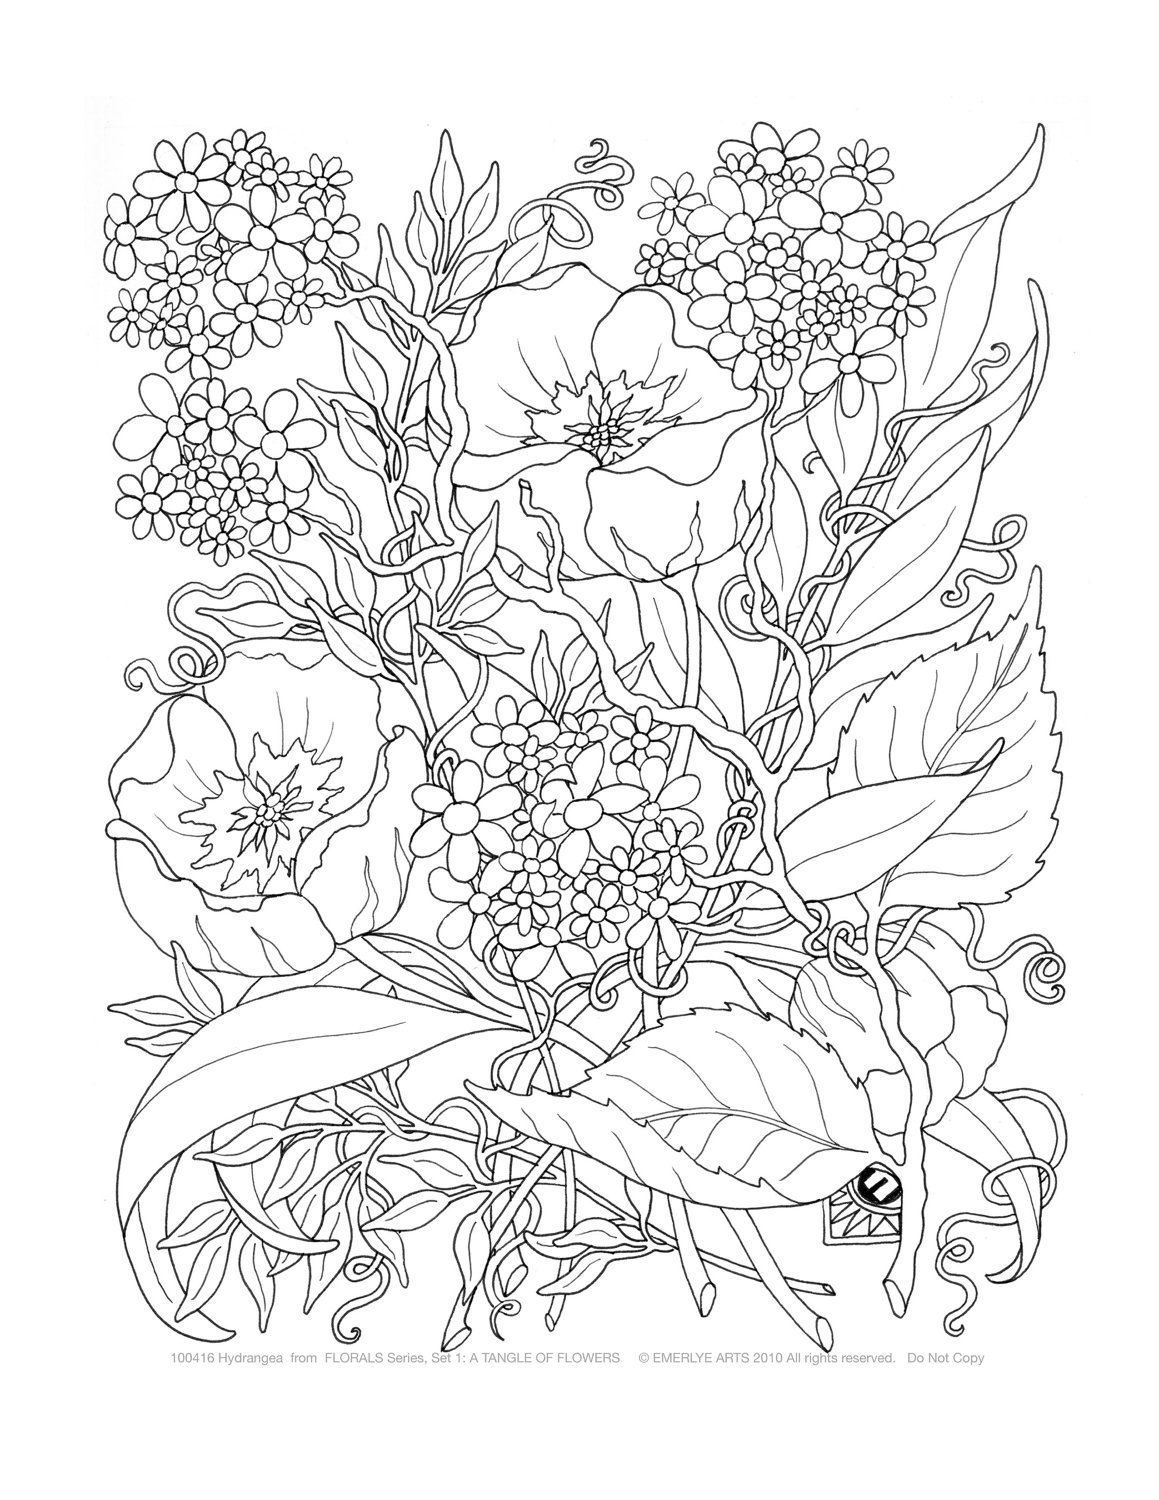 Difficult Halloween Coloring Pages To Print - VoteForVerde.com